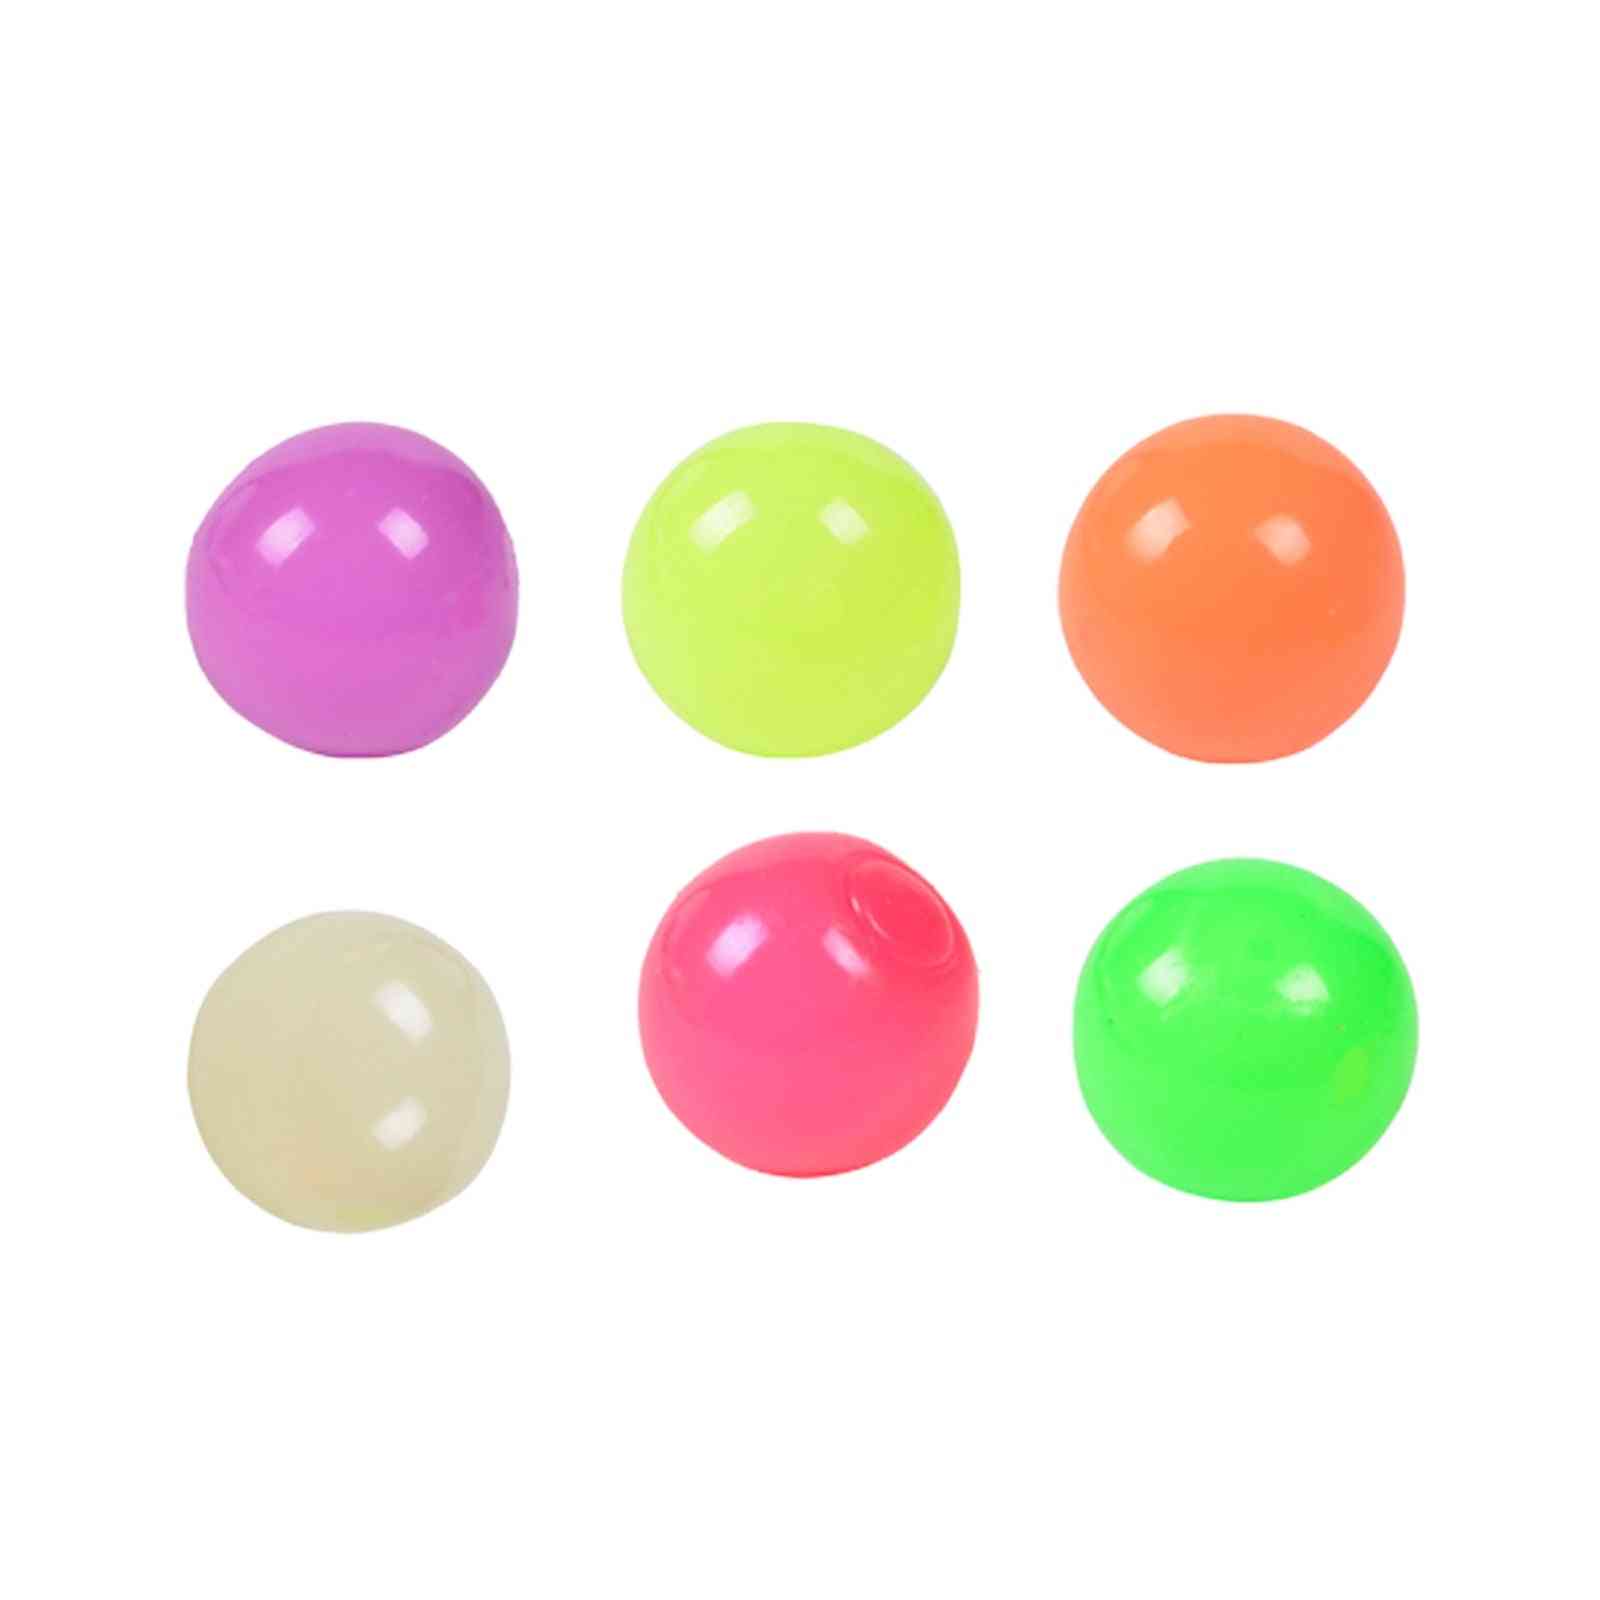 Wall Balls Fun Stress Relief Squeeze Stretchy Luminous Toy